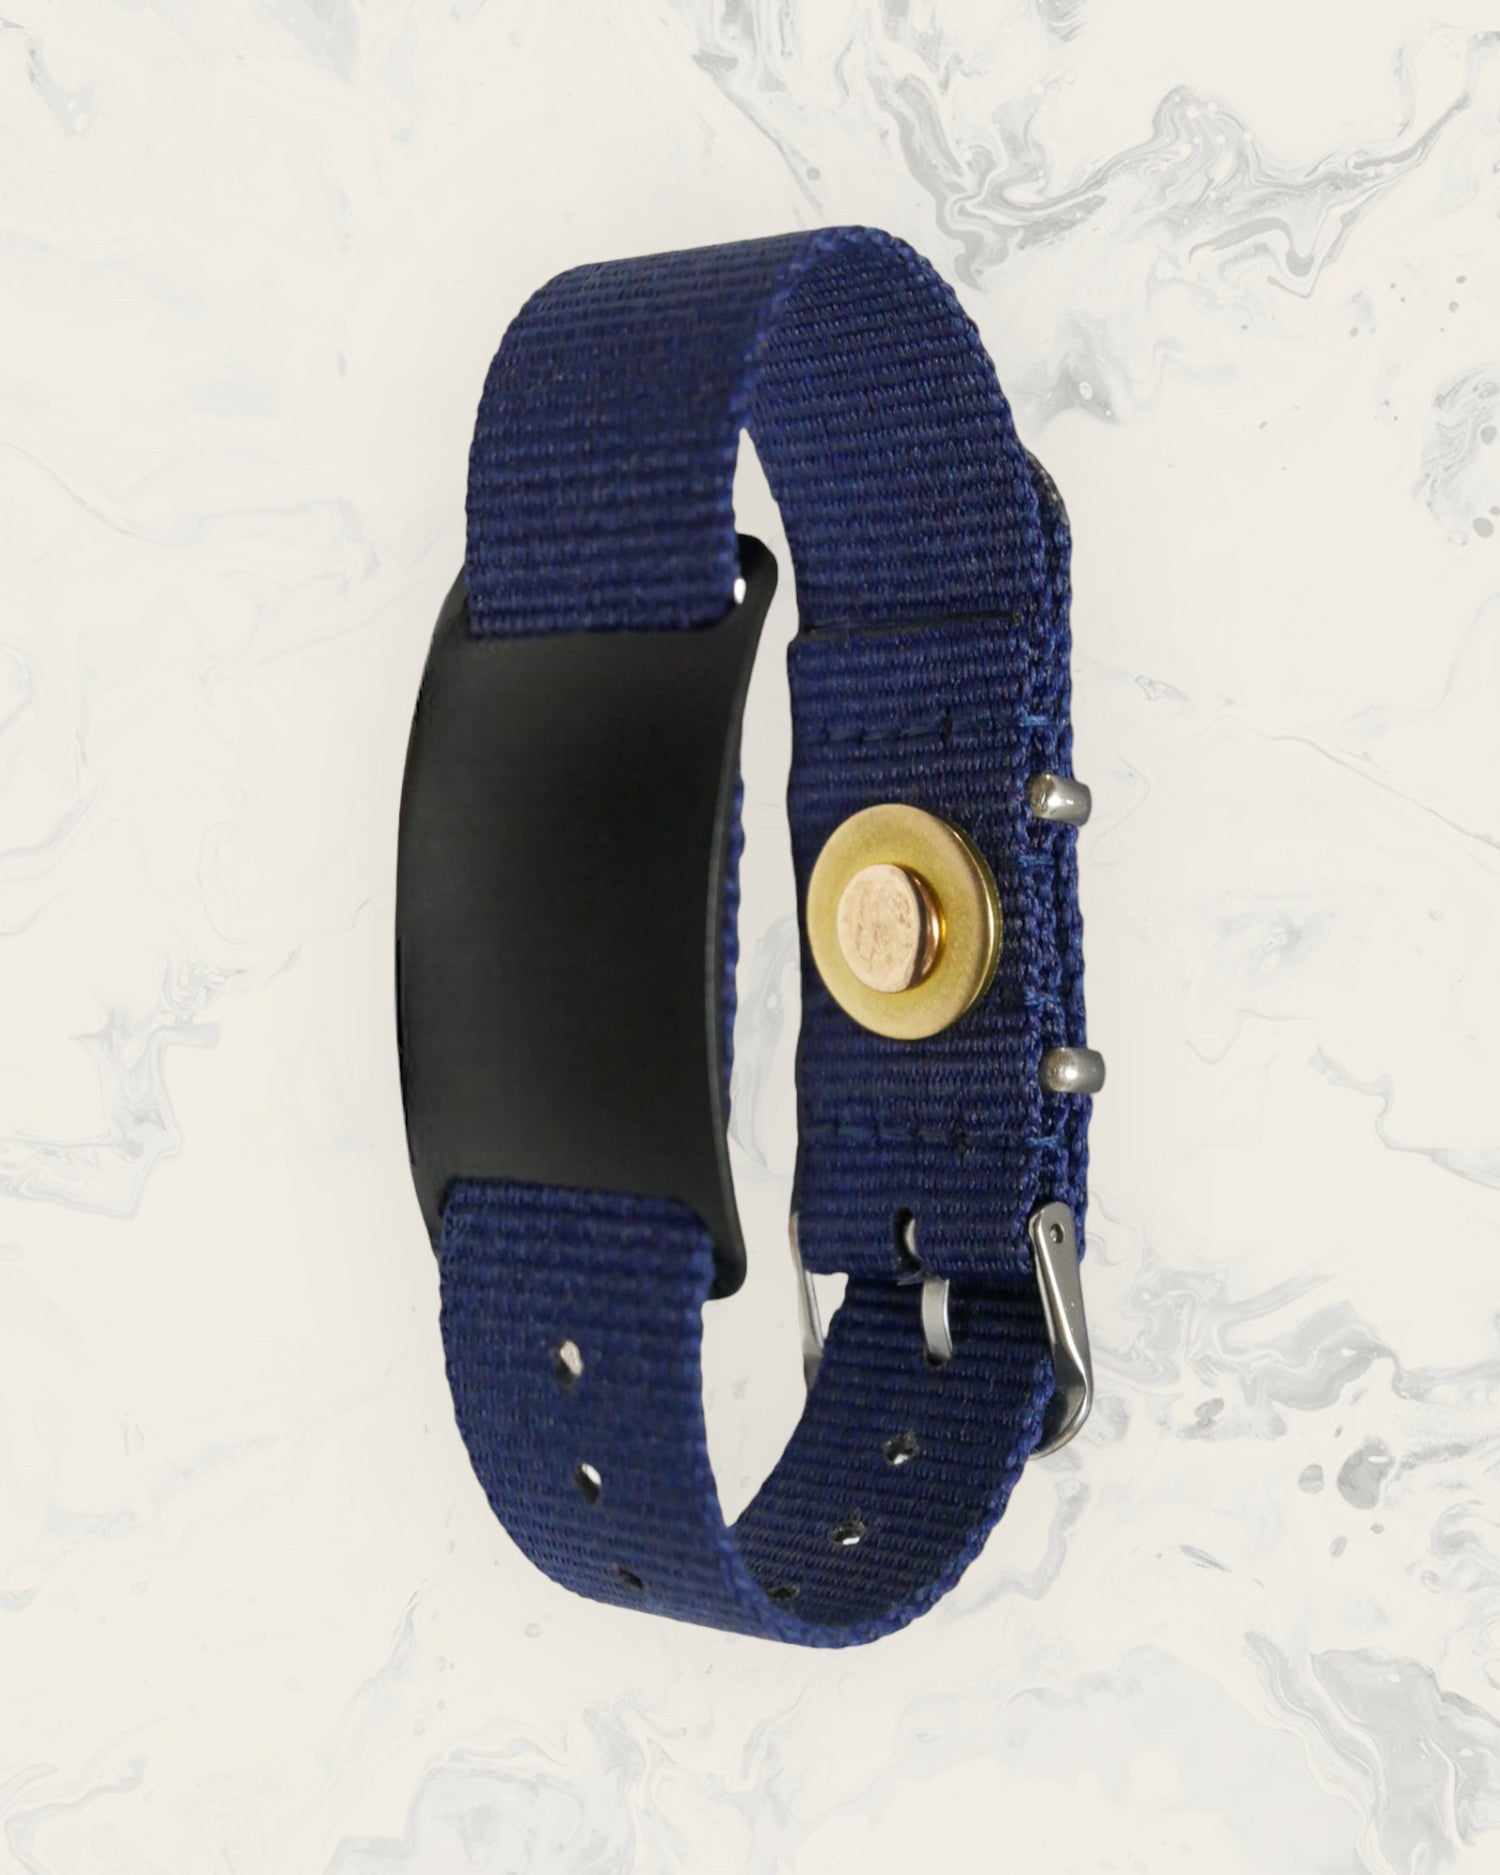 Natural Pain Relief and EMF Protection Bracelet Nylon Band Color Navy Blue with a Black Slider